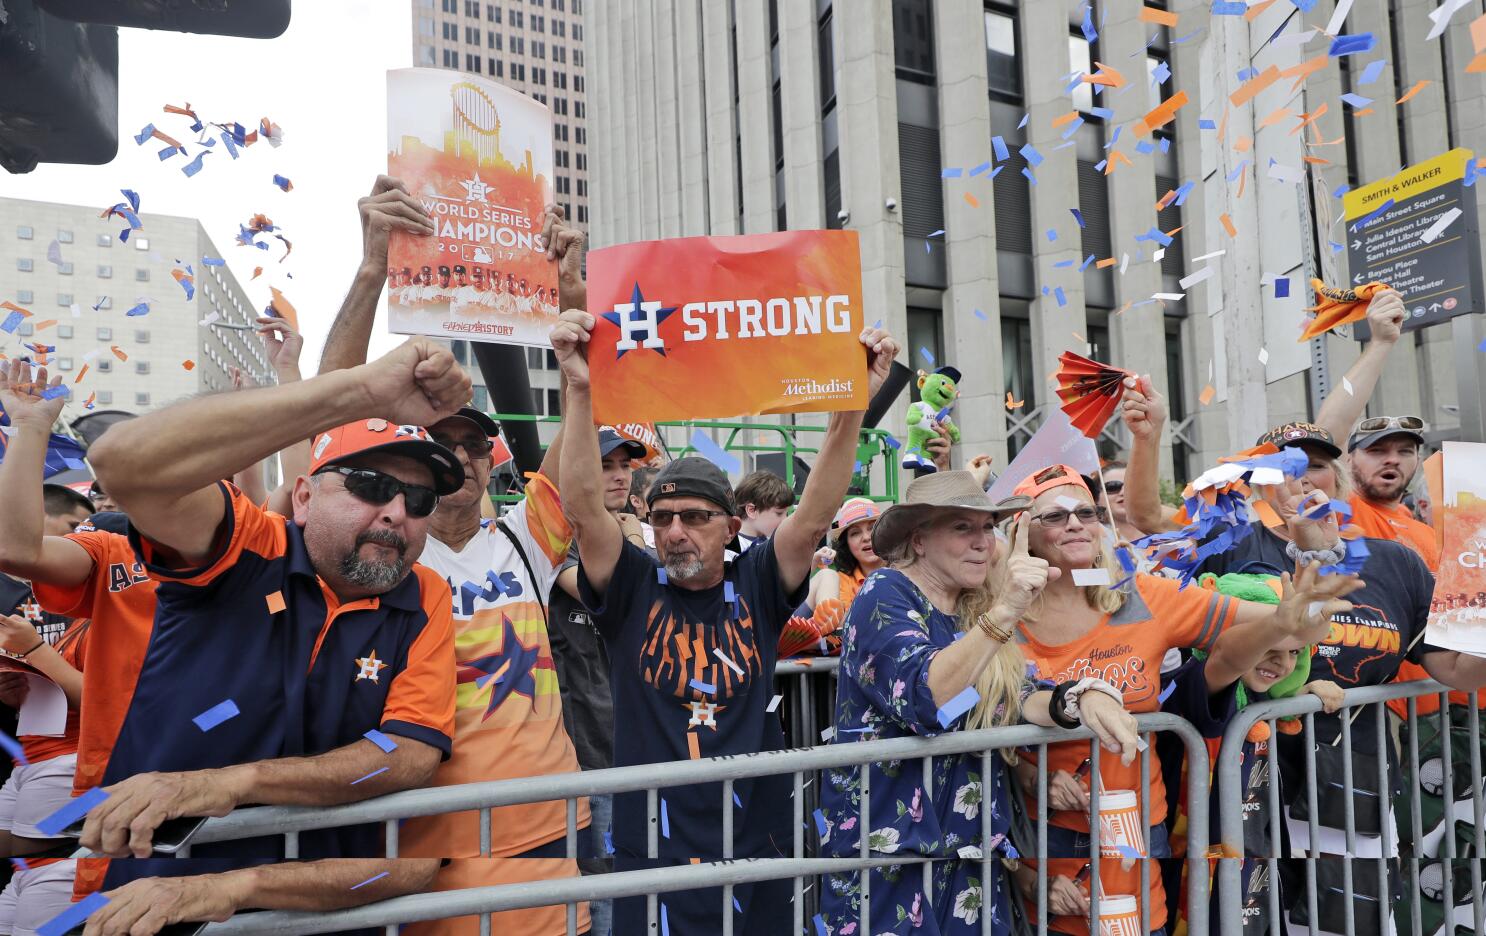 Astros fans know their team cheated: Here's why they're ready to